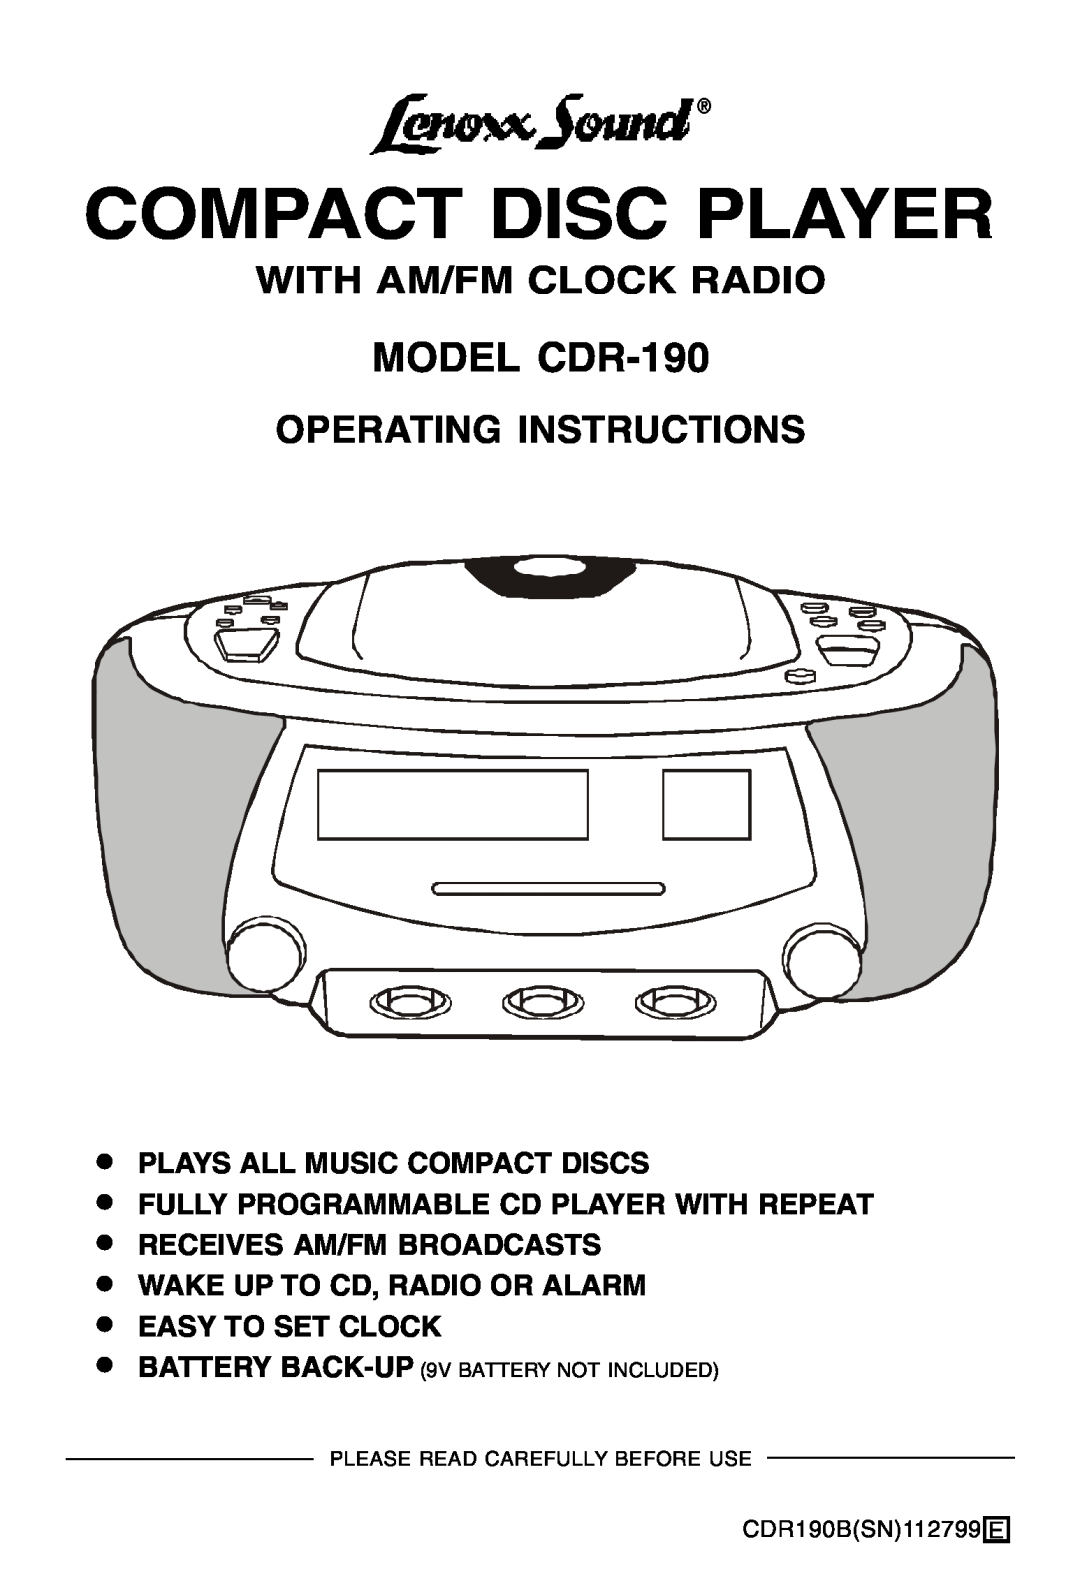 Lenoxx Electronics operating instructions MODEL CDR-190, Plays All Music Compact Discs, Receives Am/Fm Broadcasts 